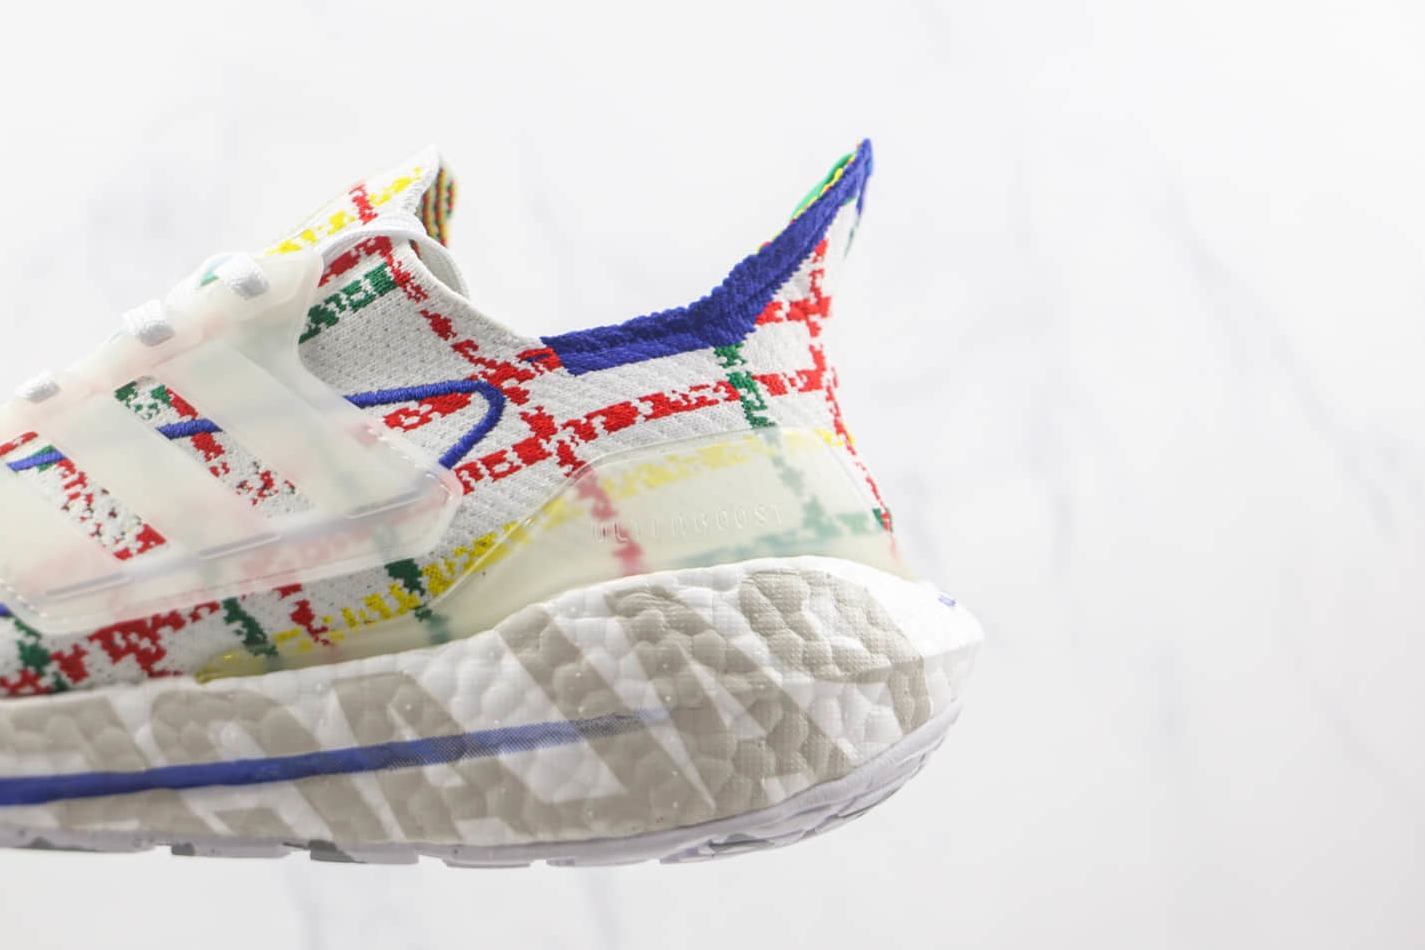 Adidas Palace x UltraBoost 21 White Multicolor GY5556 - Limited Edition Sneakers